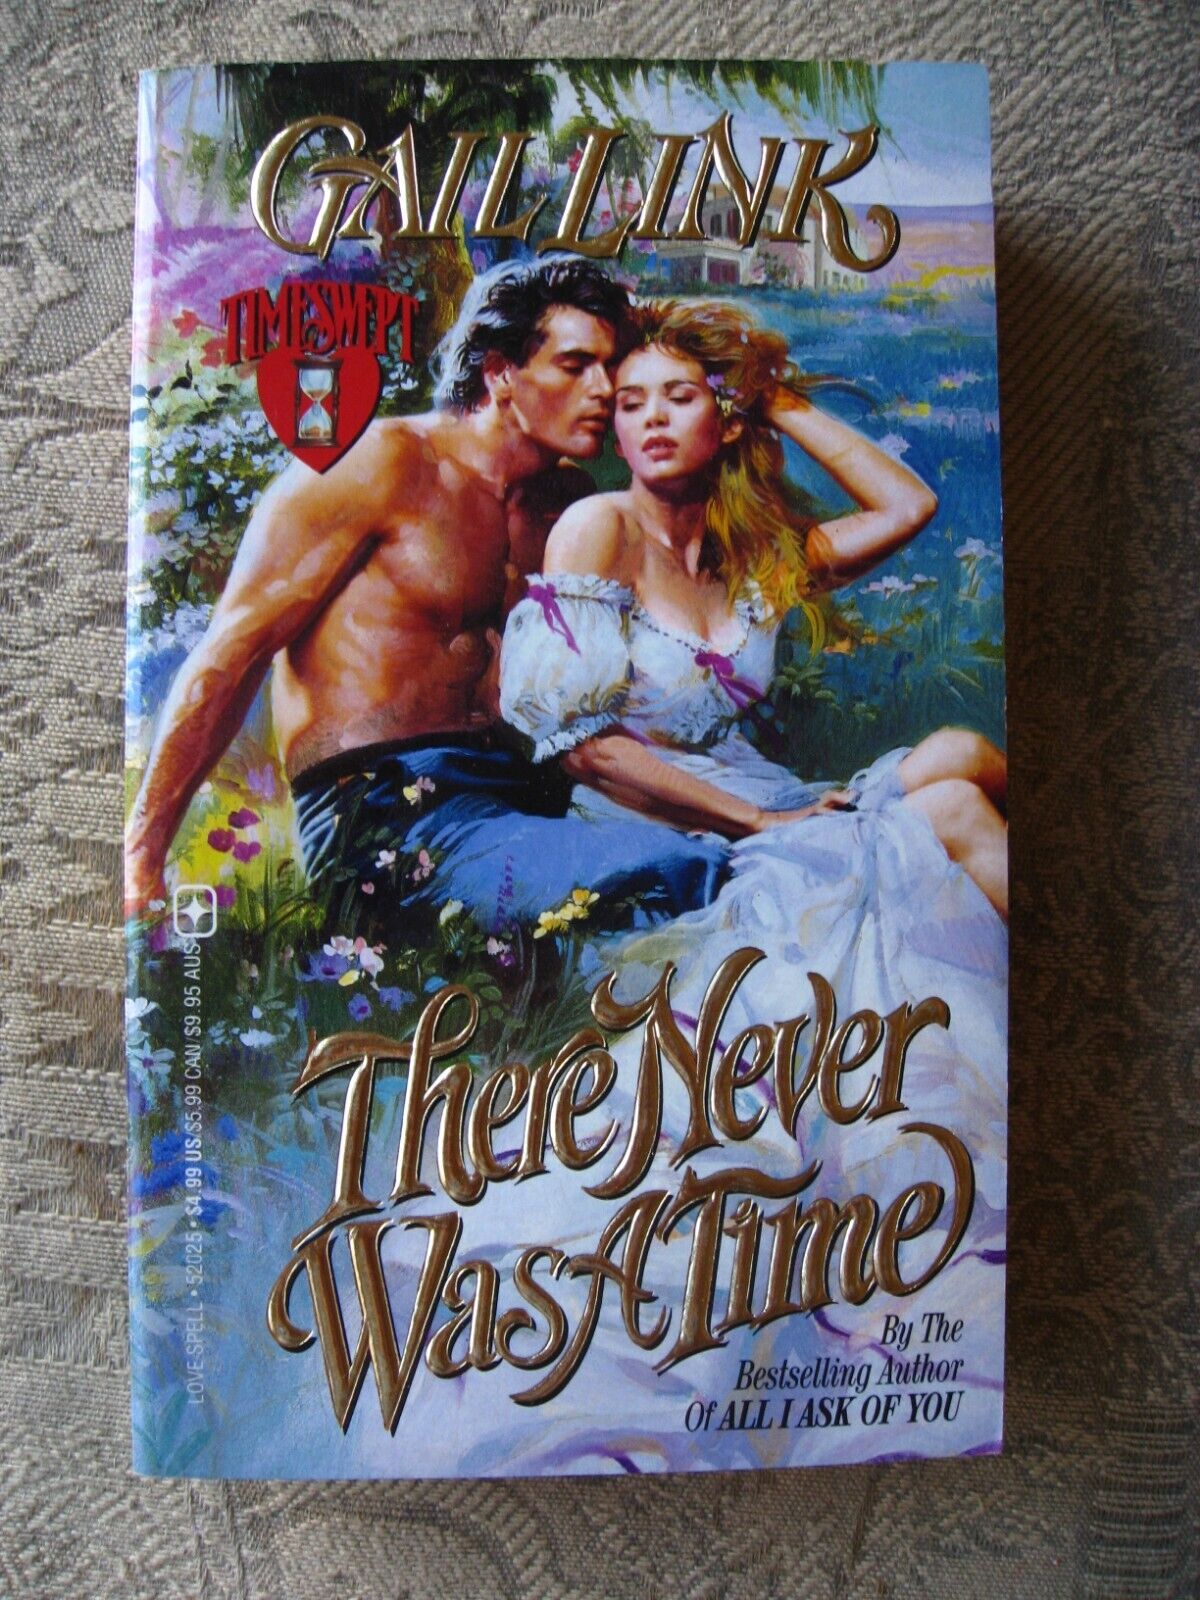 Gail Link - There Never Was a Time - 1995 - paperback